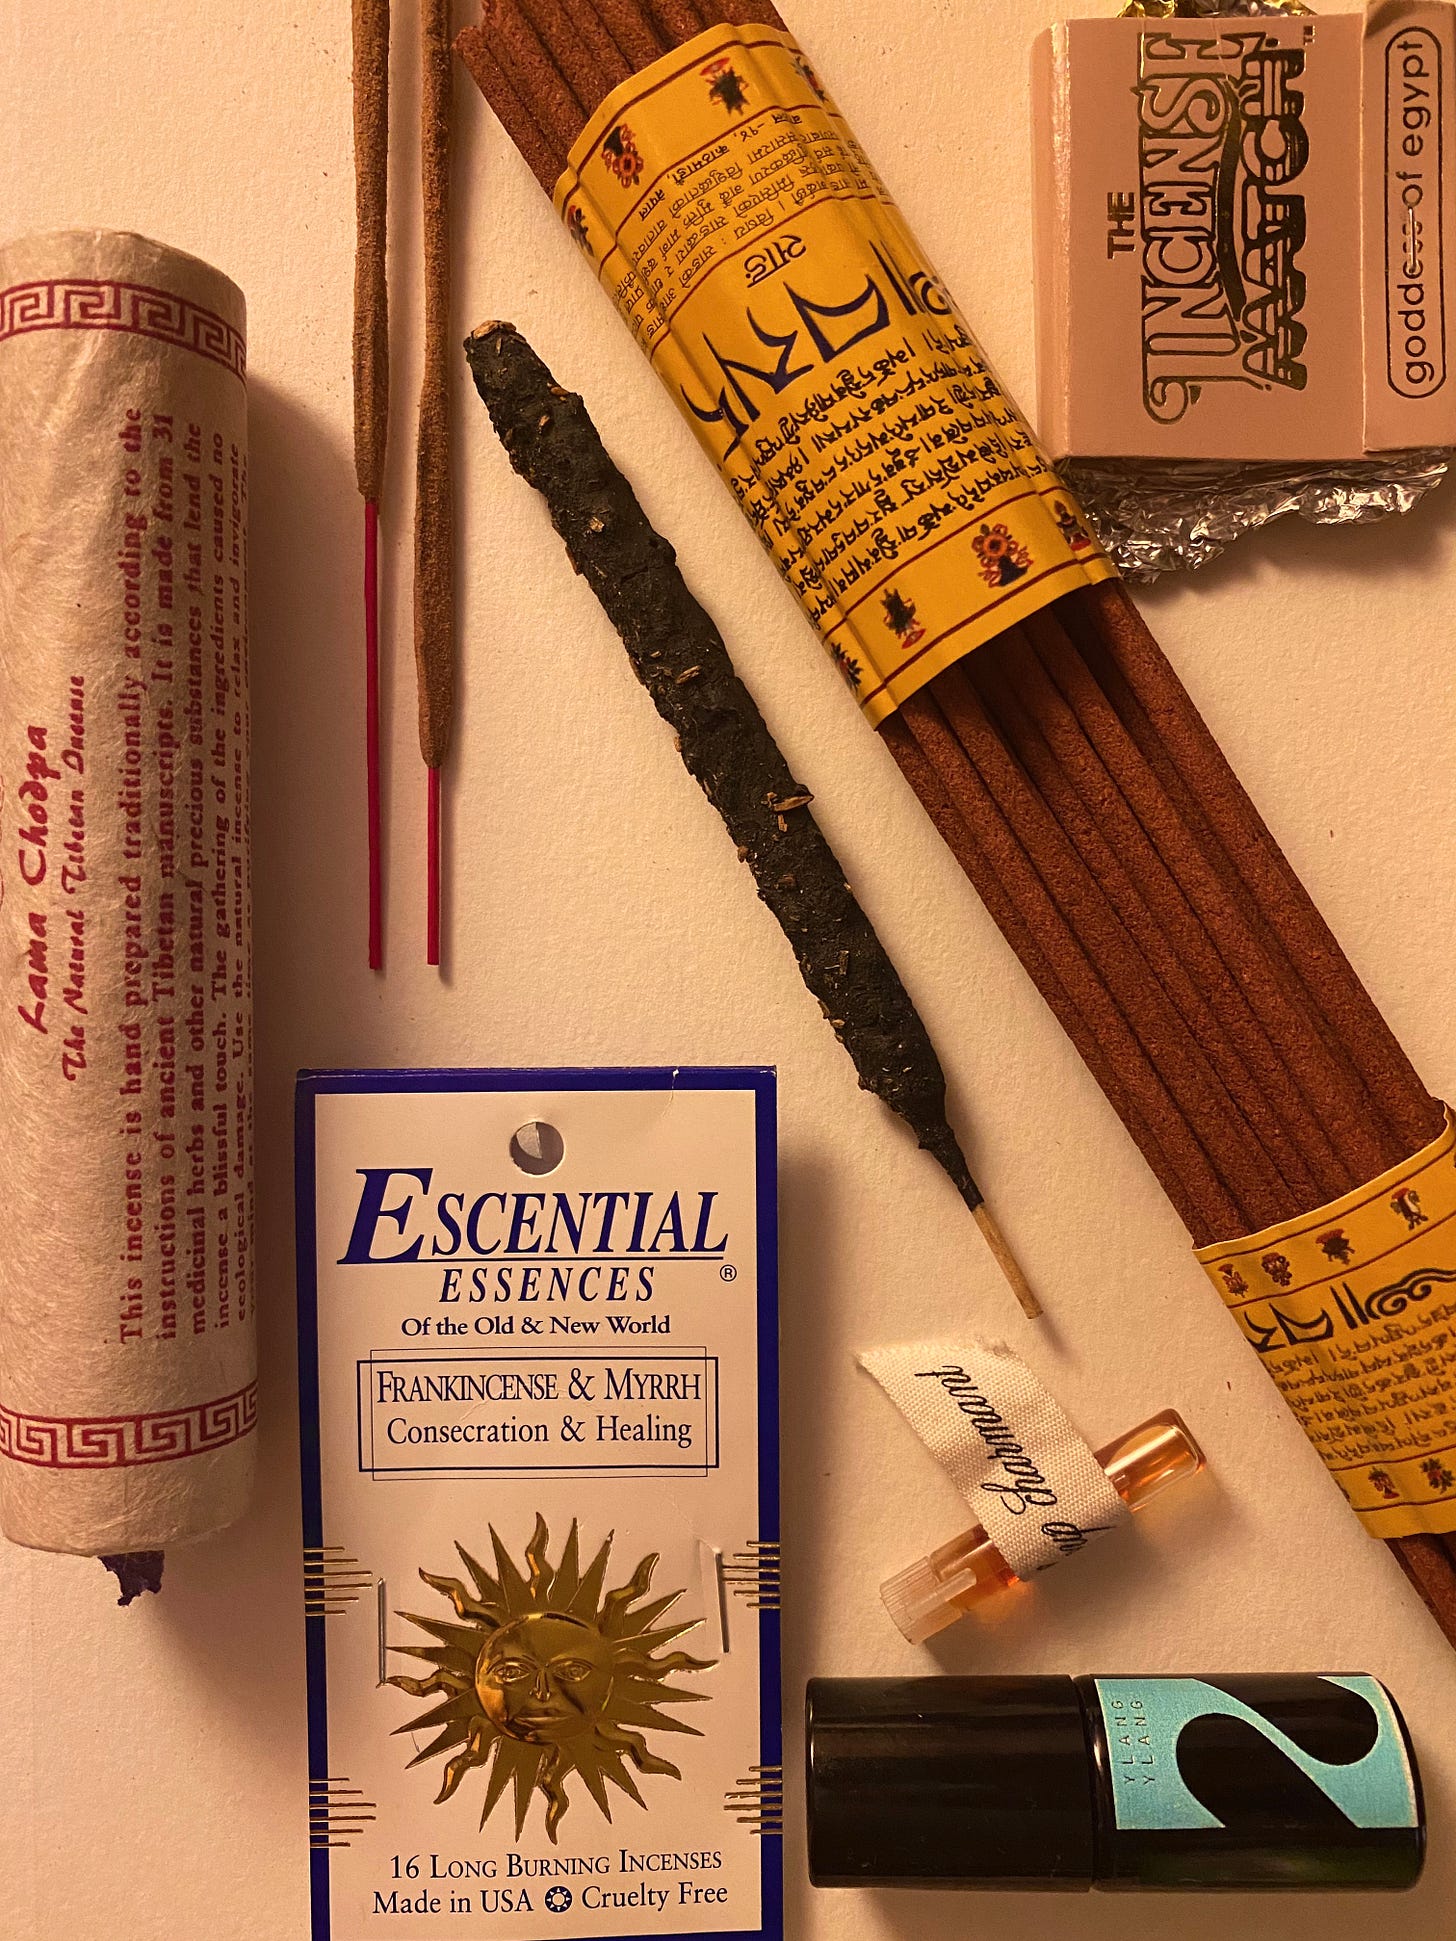 An array of different incense and two small perfume bottles of ylang ylang and a musky sweet scent named "loup charmant." One of the incense is a brand "Escential Essences," another is an incense matchbook named "goddess of egypt," and another is a traditional tibetan hand rolled incense. the image is warm in tone 